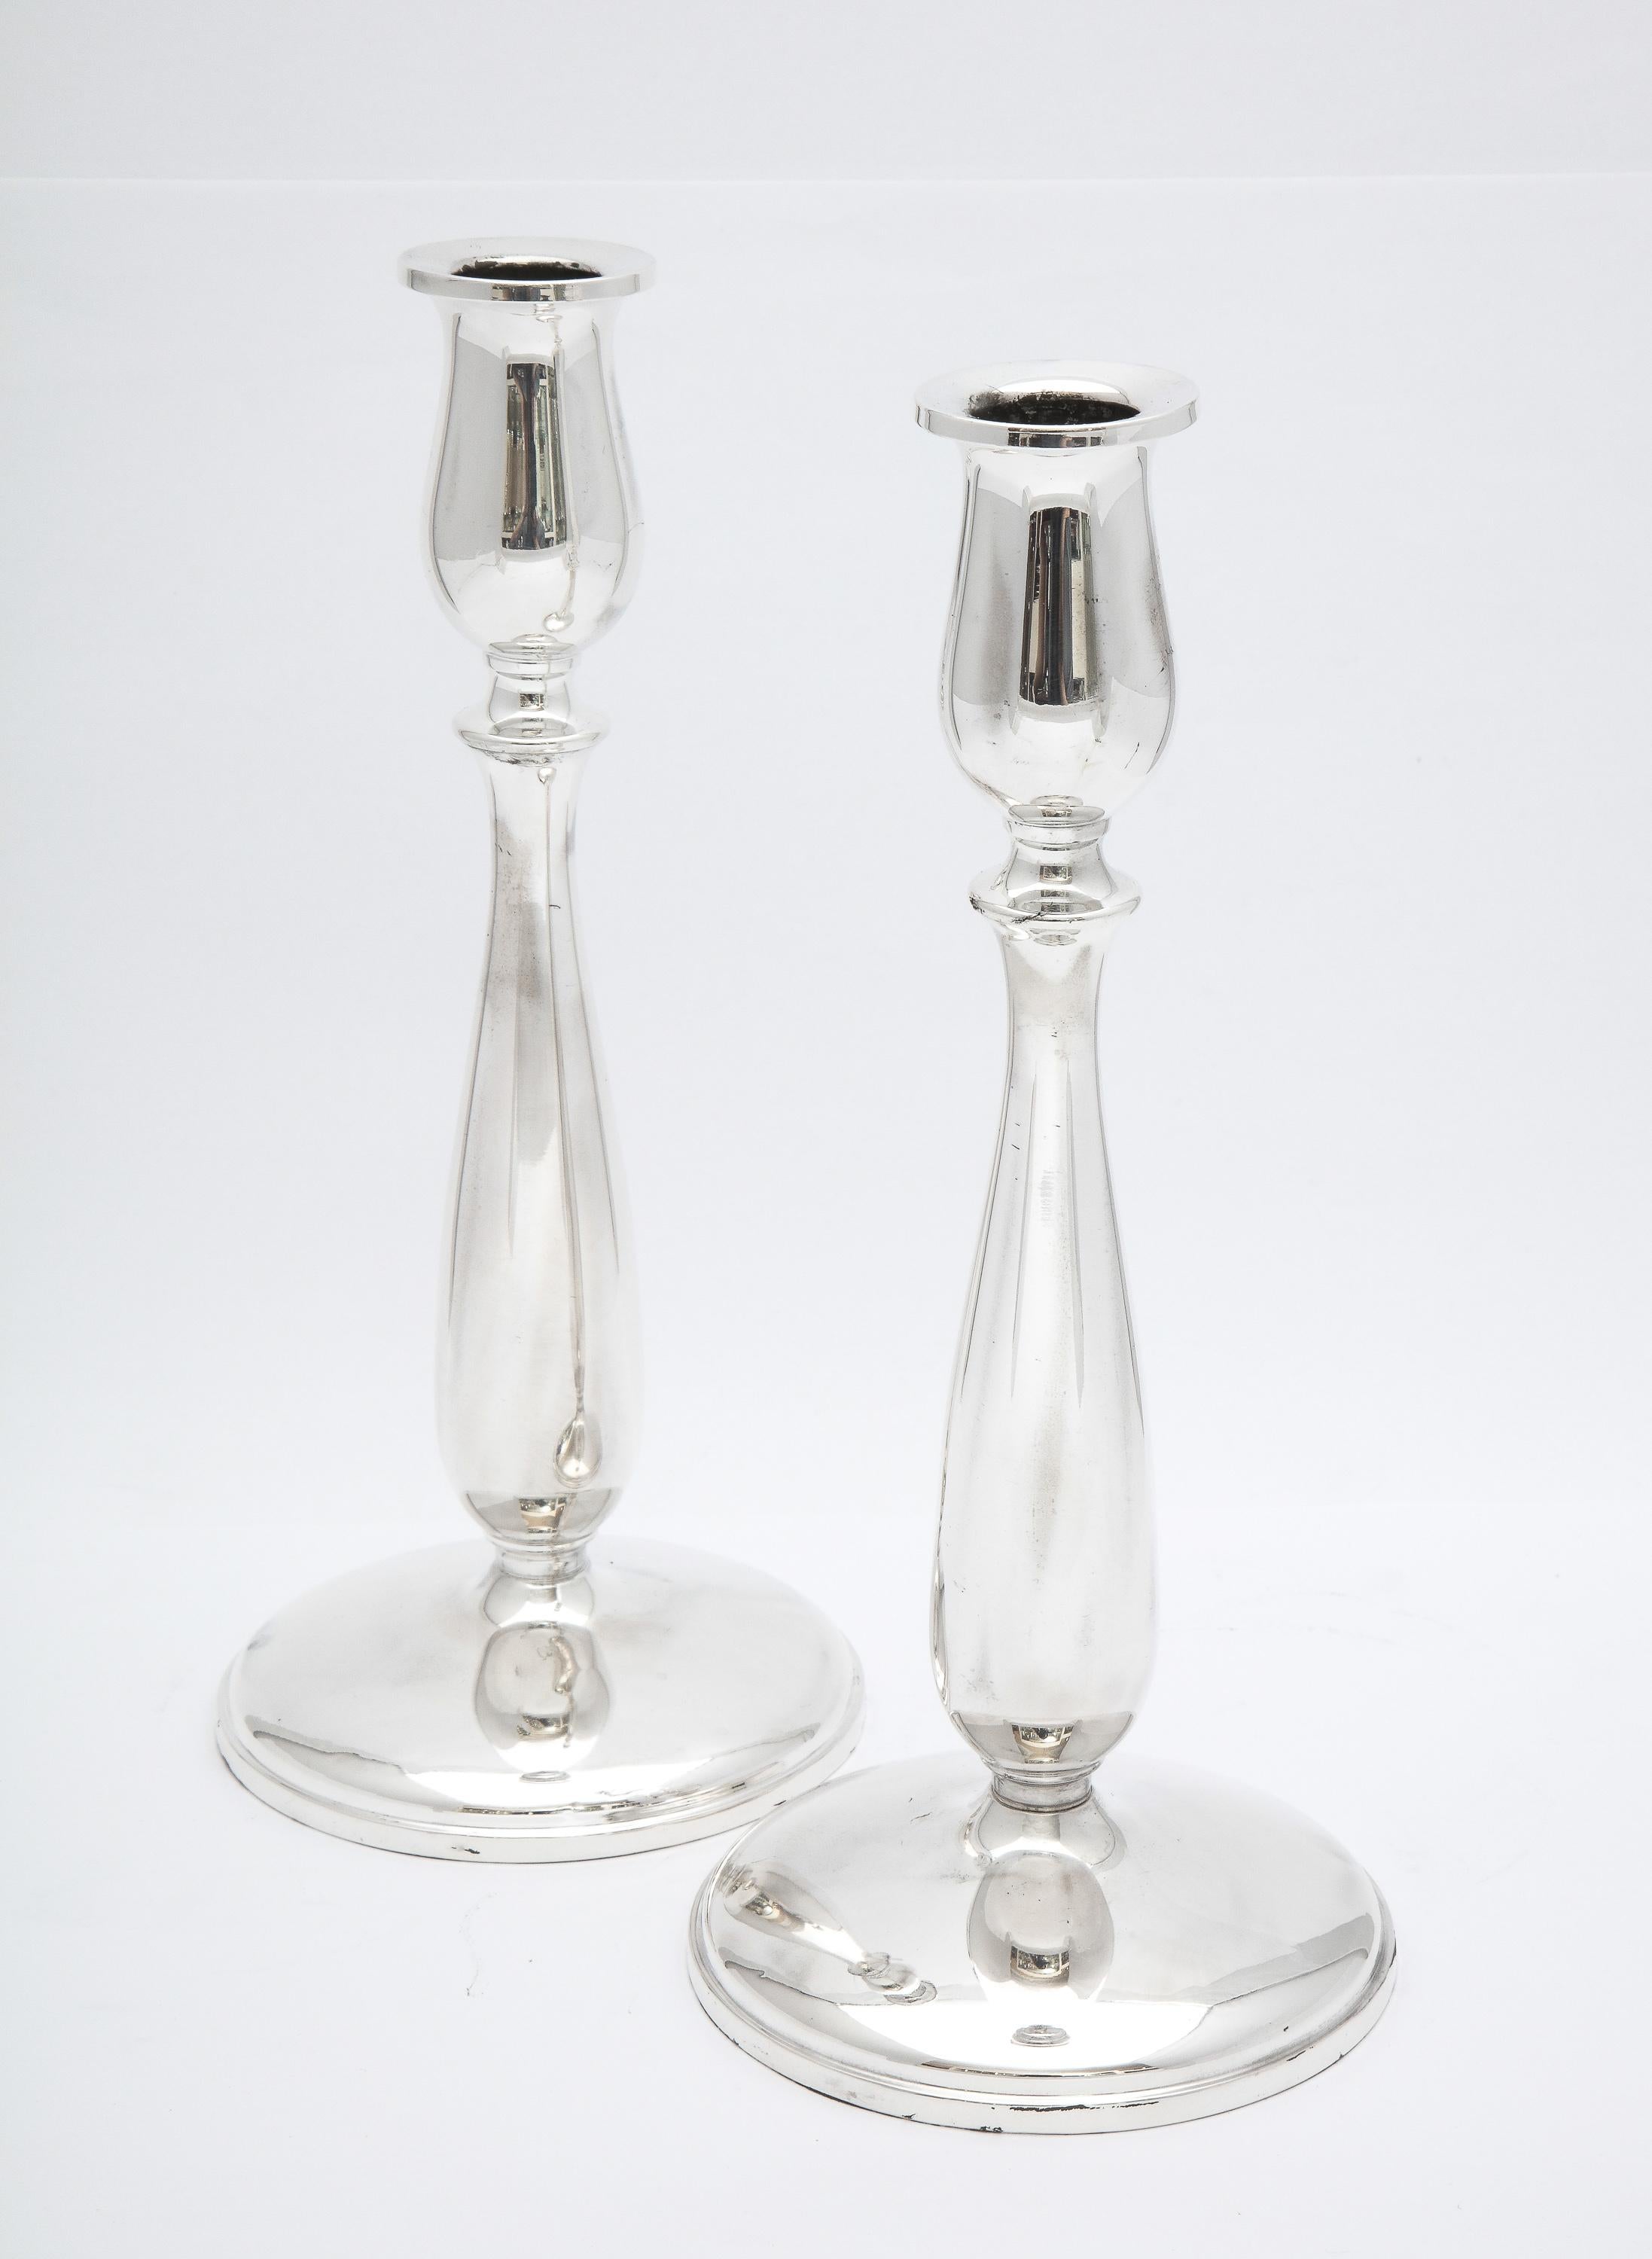 American Mid-Century Modern Pair of Sterling Silver Candlesticks